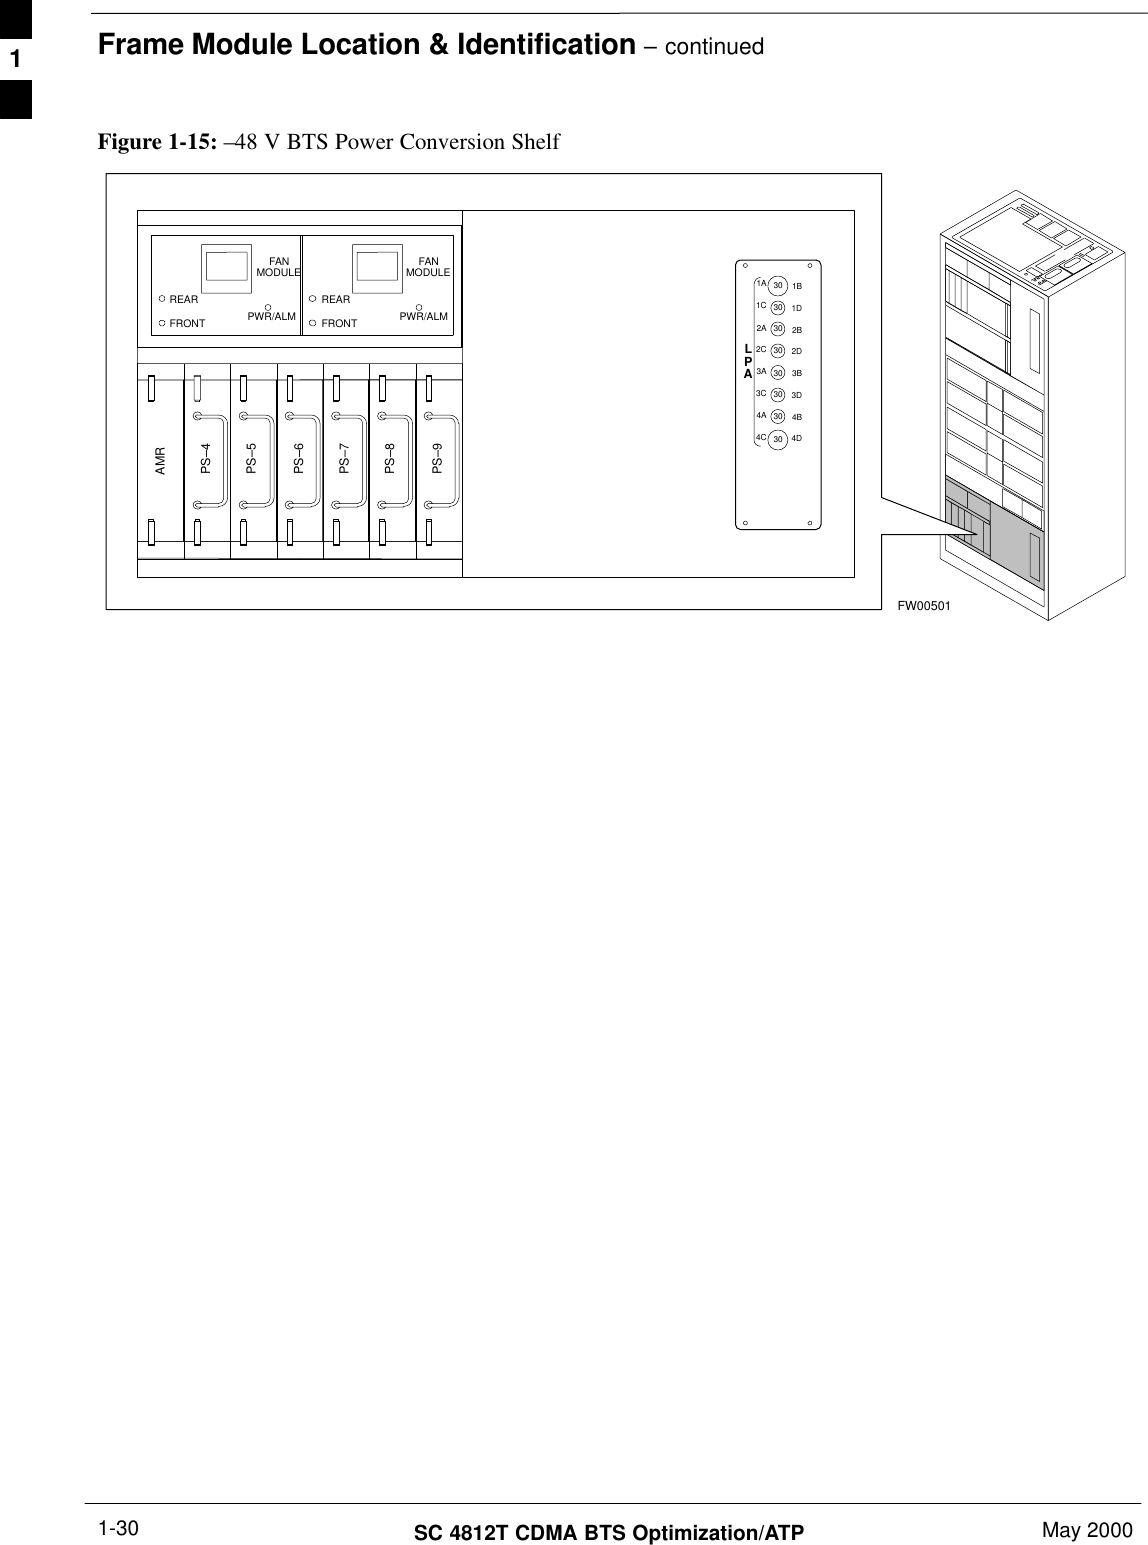 Frame Module Location &amp; Identification – continuedSC 4812T CDMA BTS Optimization/ATP May 20001-30Figure 1-15: –48 V BTS Power Conversion ShelfFW00501PS–6AMRPS–5PS–4PS–9PS–8PS–71C1A2A2C3C3A4A4CLPA1D1B2B2D3D3B4B4D3030303030303030FANMODULEPWR/ALMREARFRONTFANMODULEPWR/ALMREARFRONT1